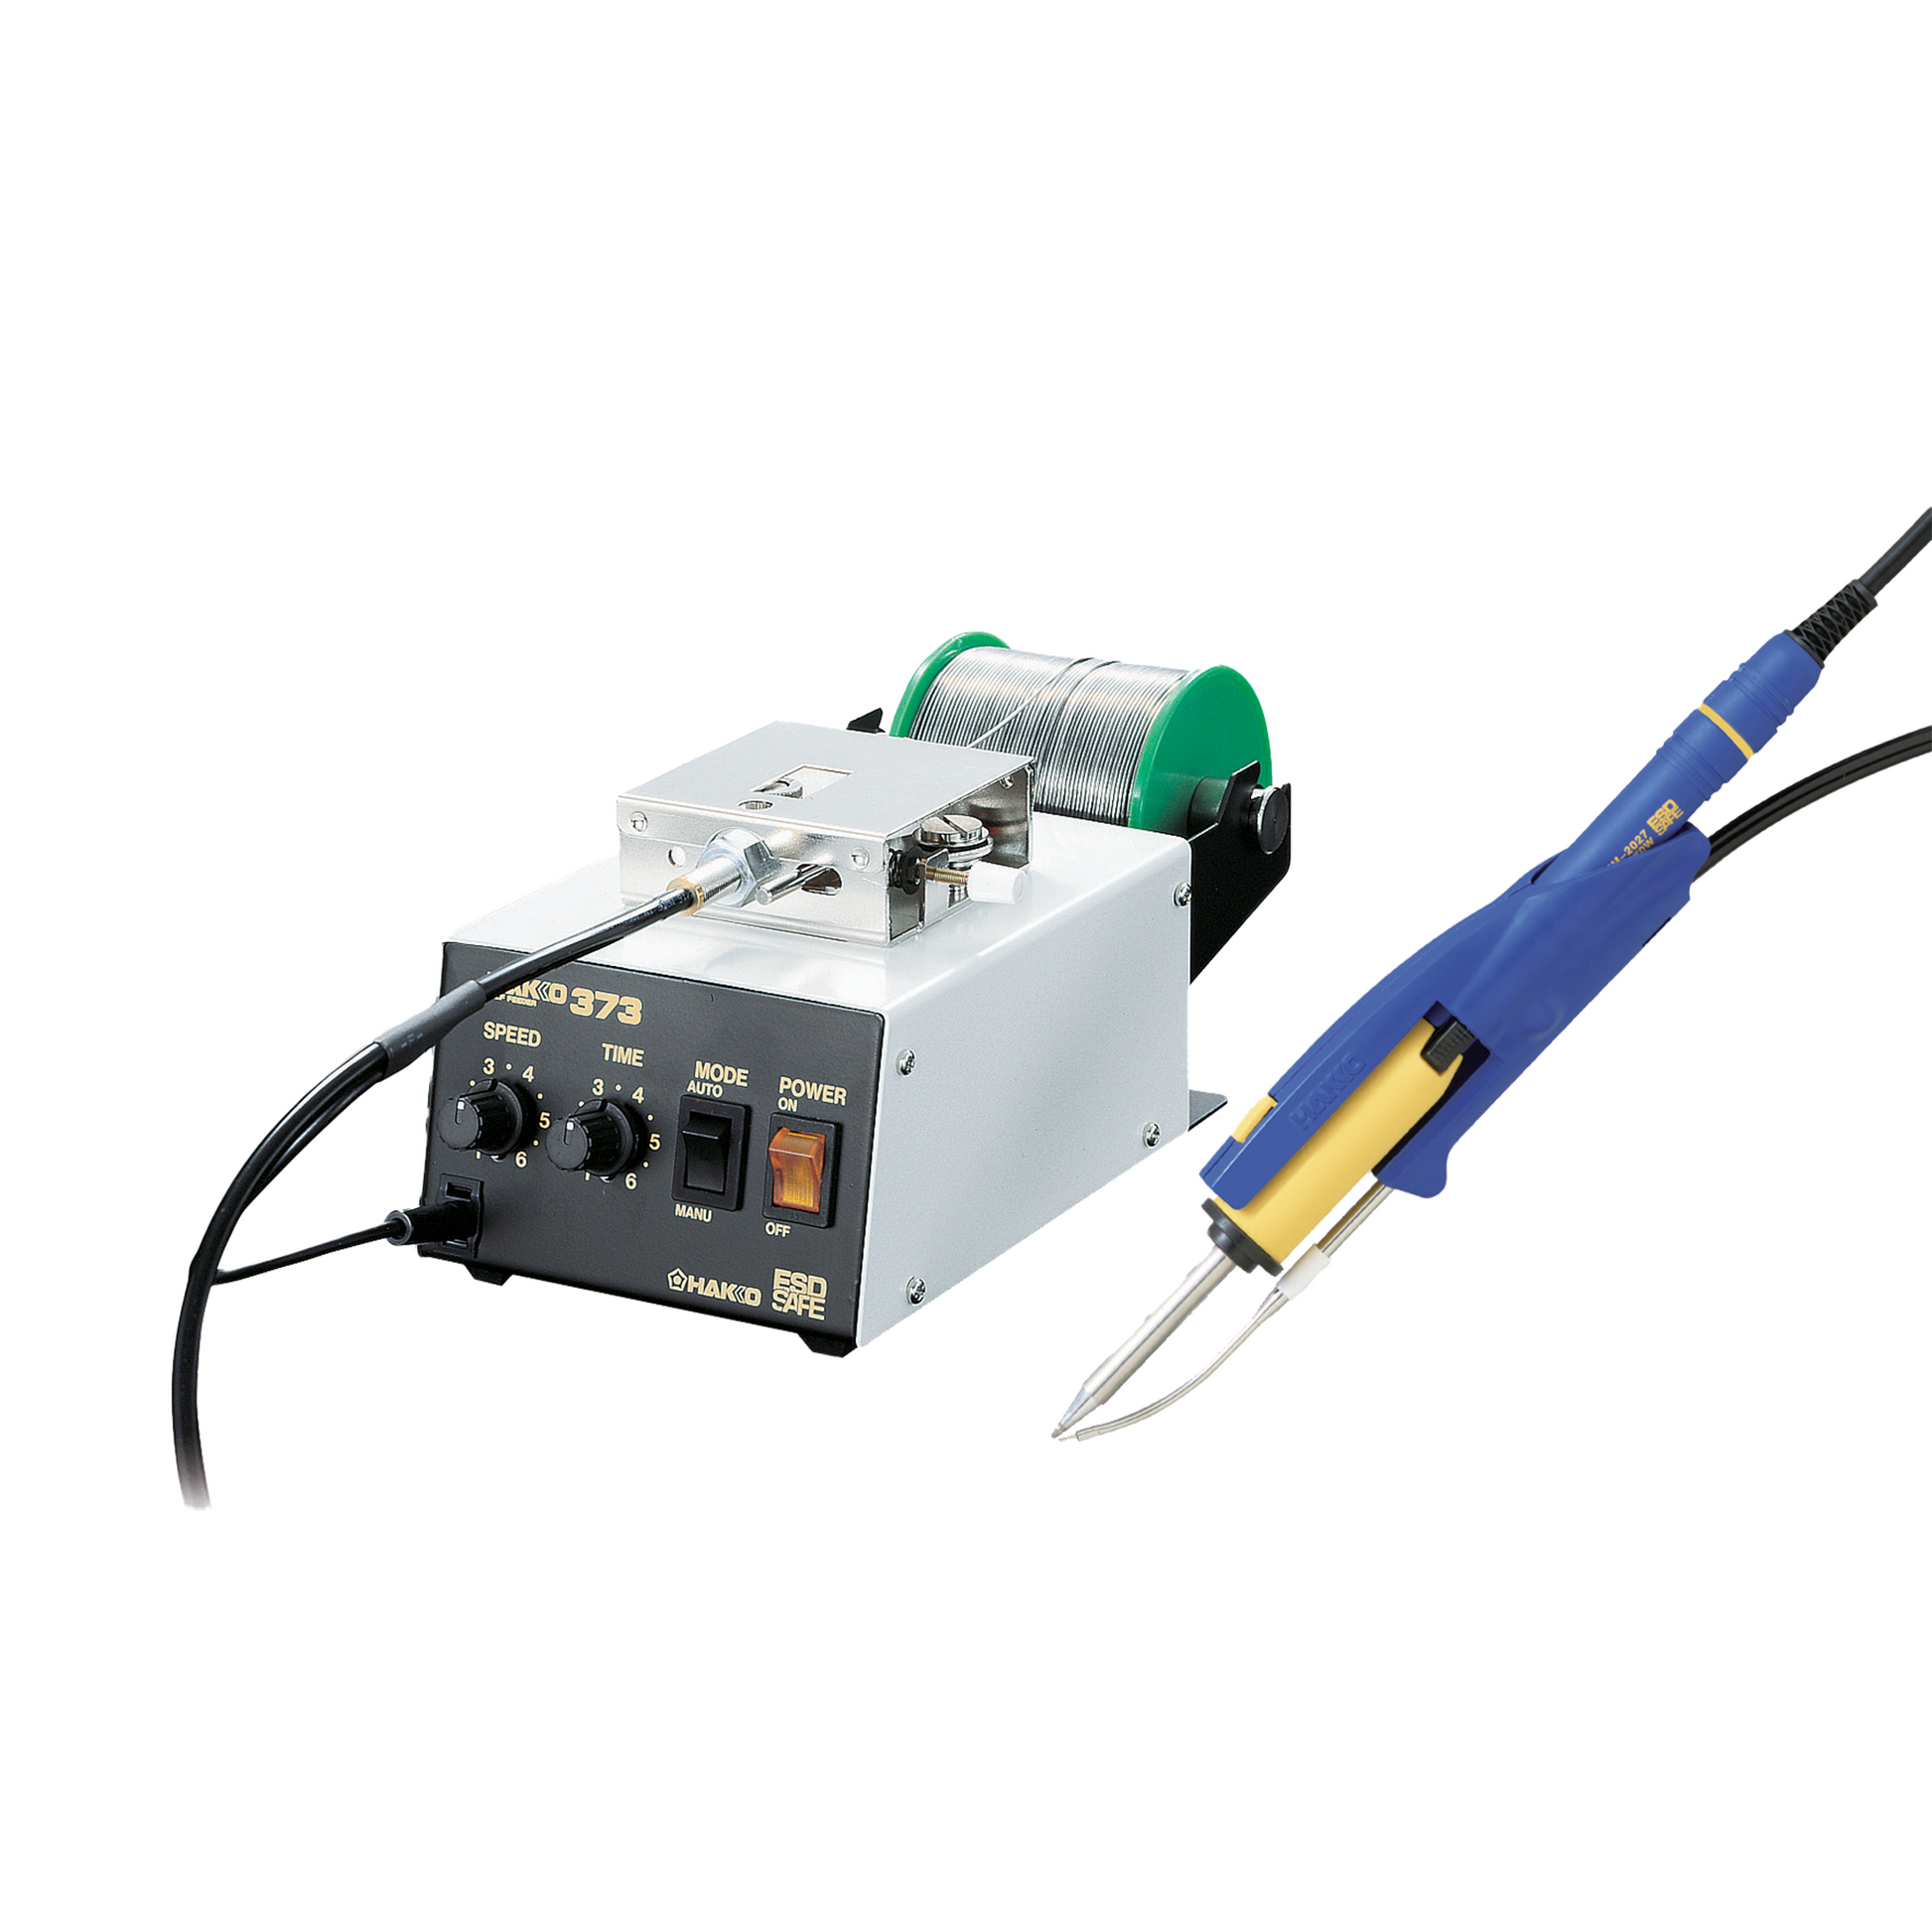 Hakko_ 373-8  Solder Feed System 230V_ Soldering Related Equipment and Materials_ Hakko Products